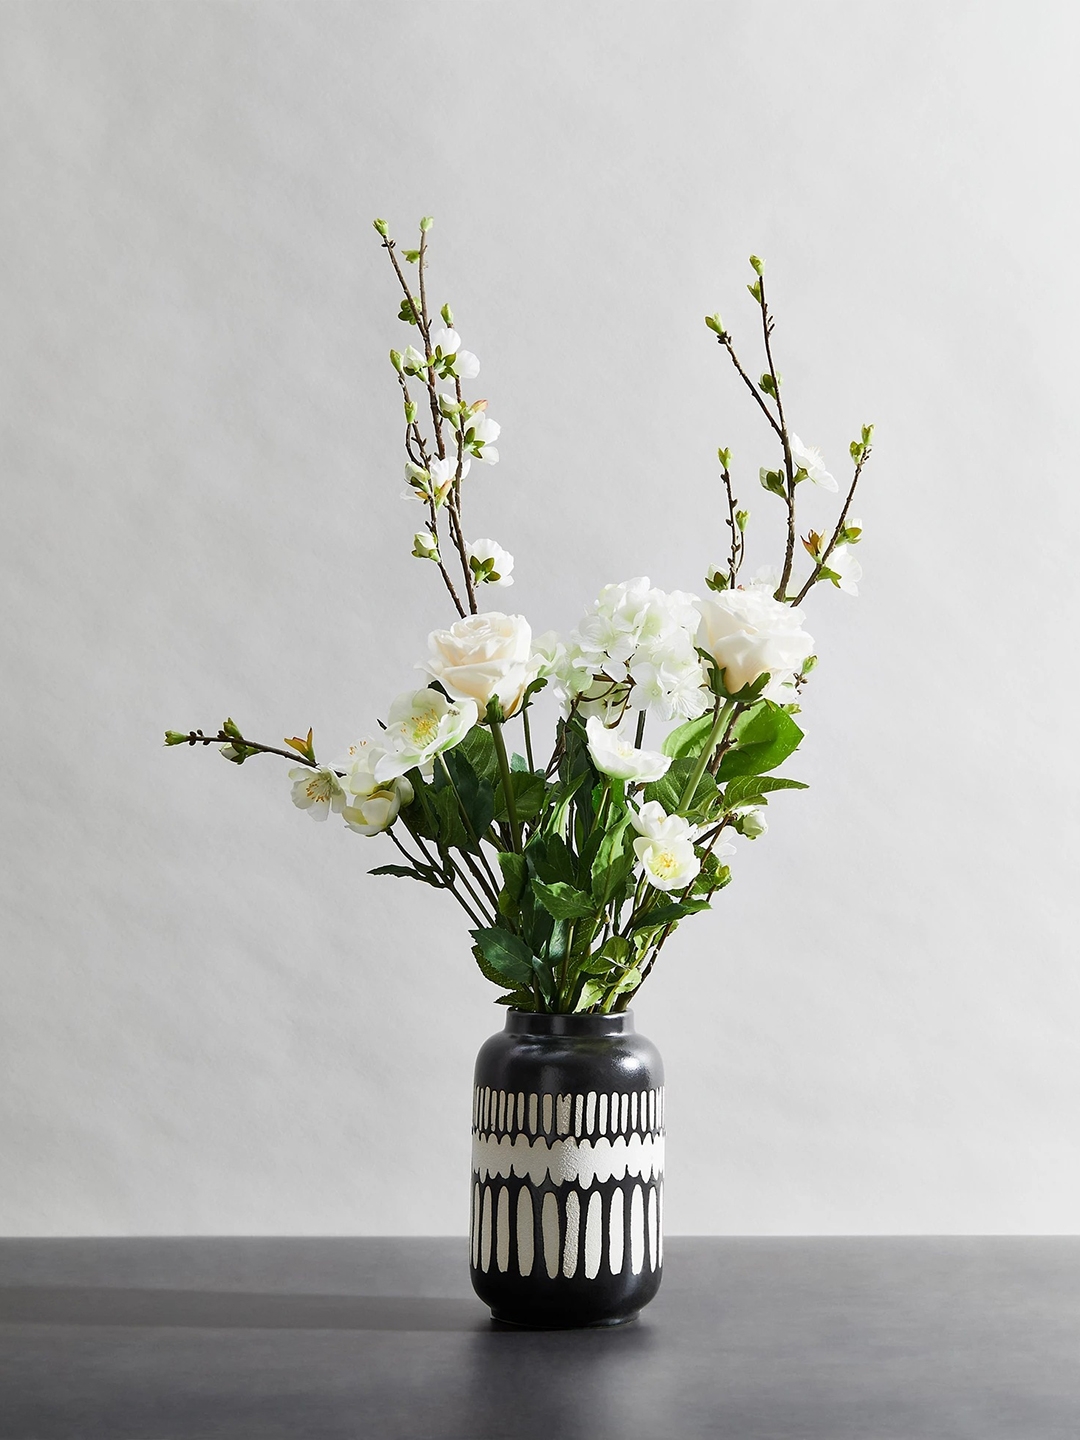 Marks & Spencer White & Green Artificial Flowers Plants